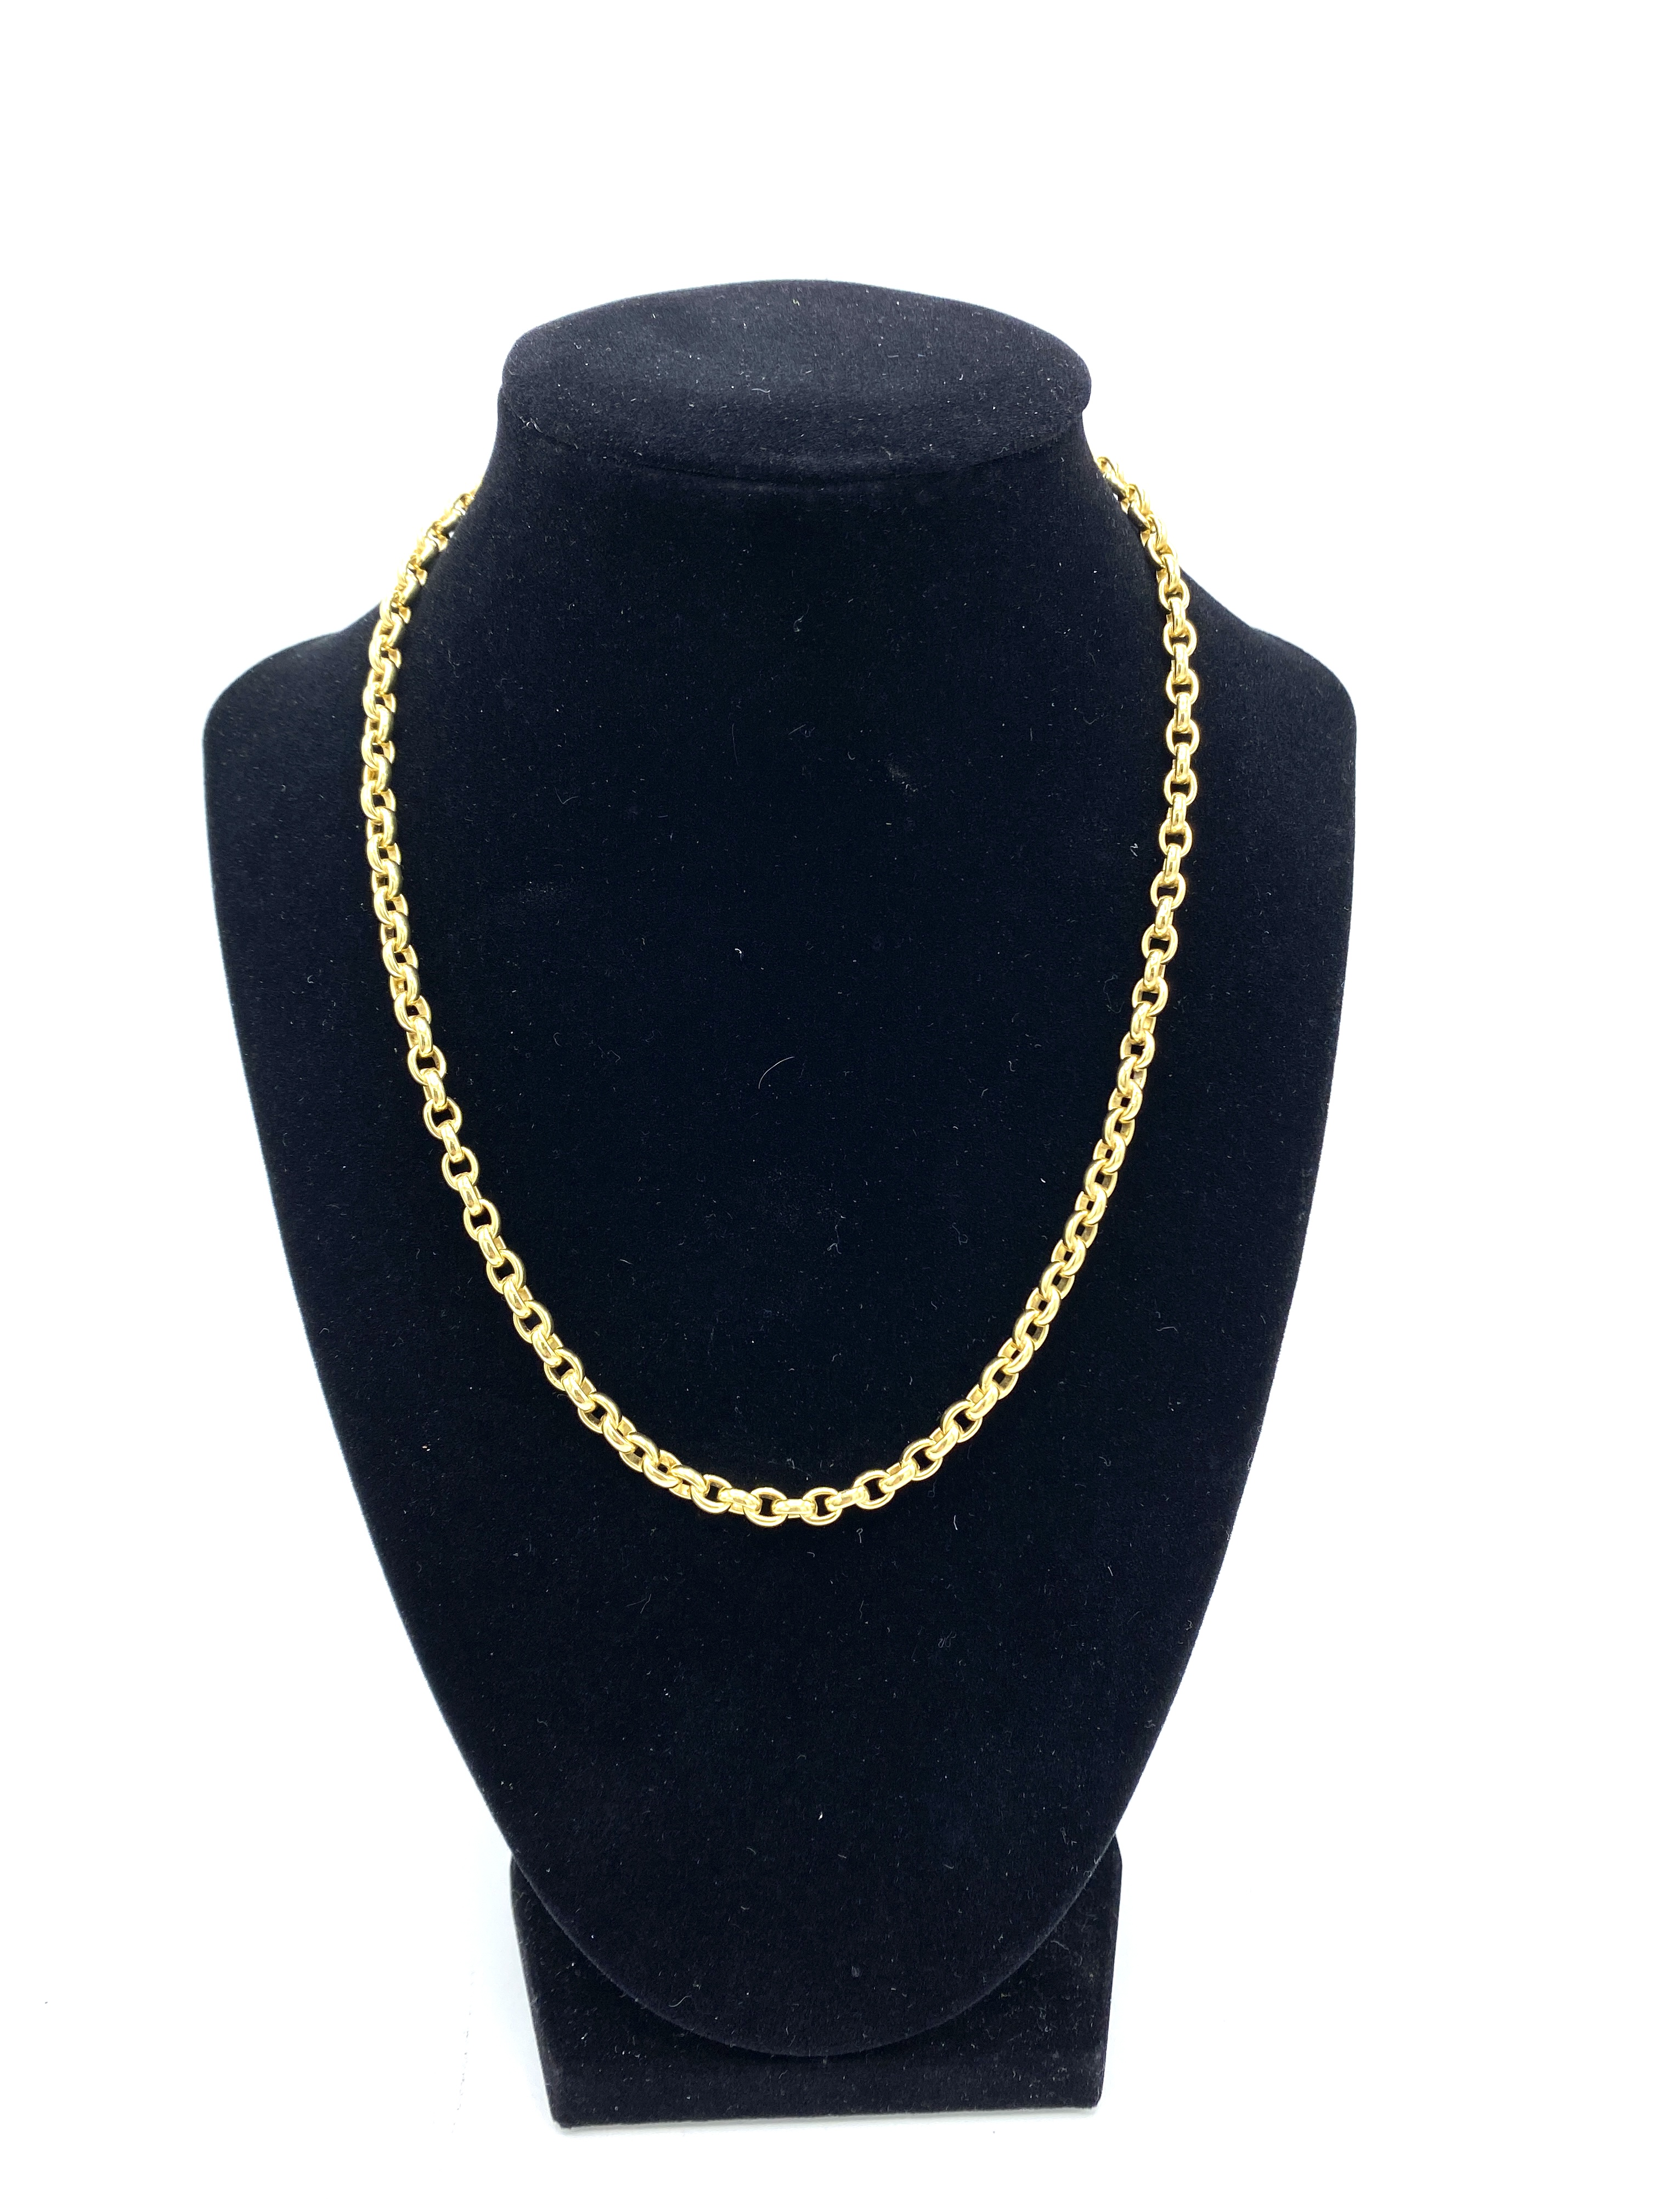 18ct gold Theo Fennell chain